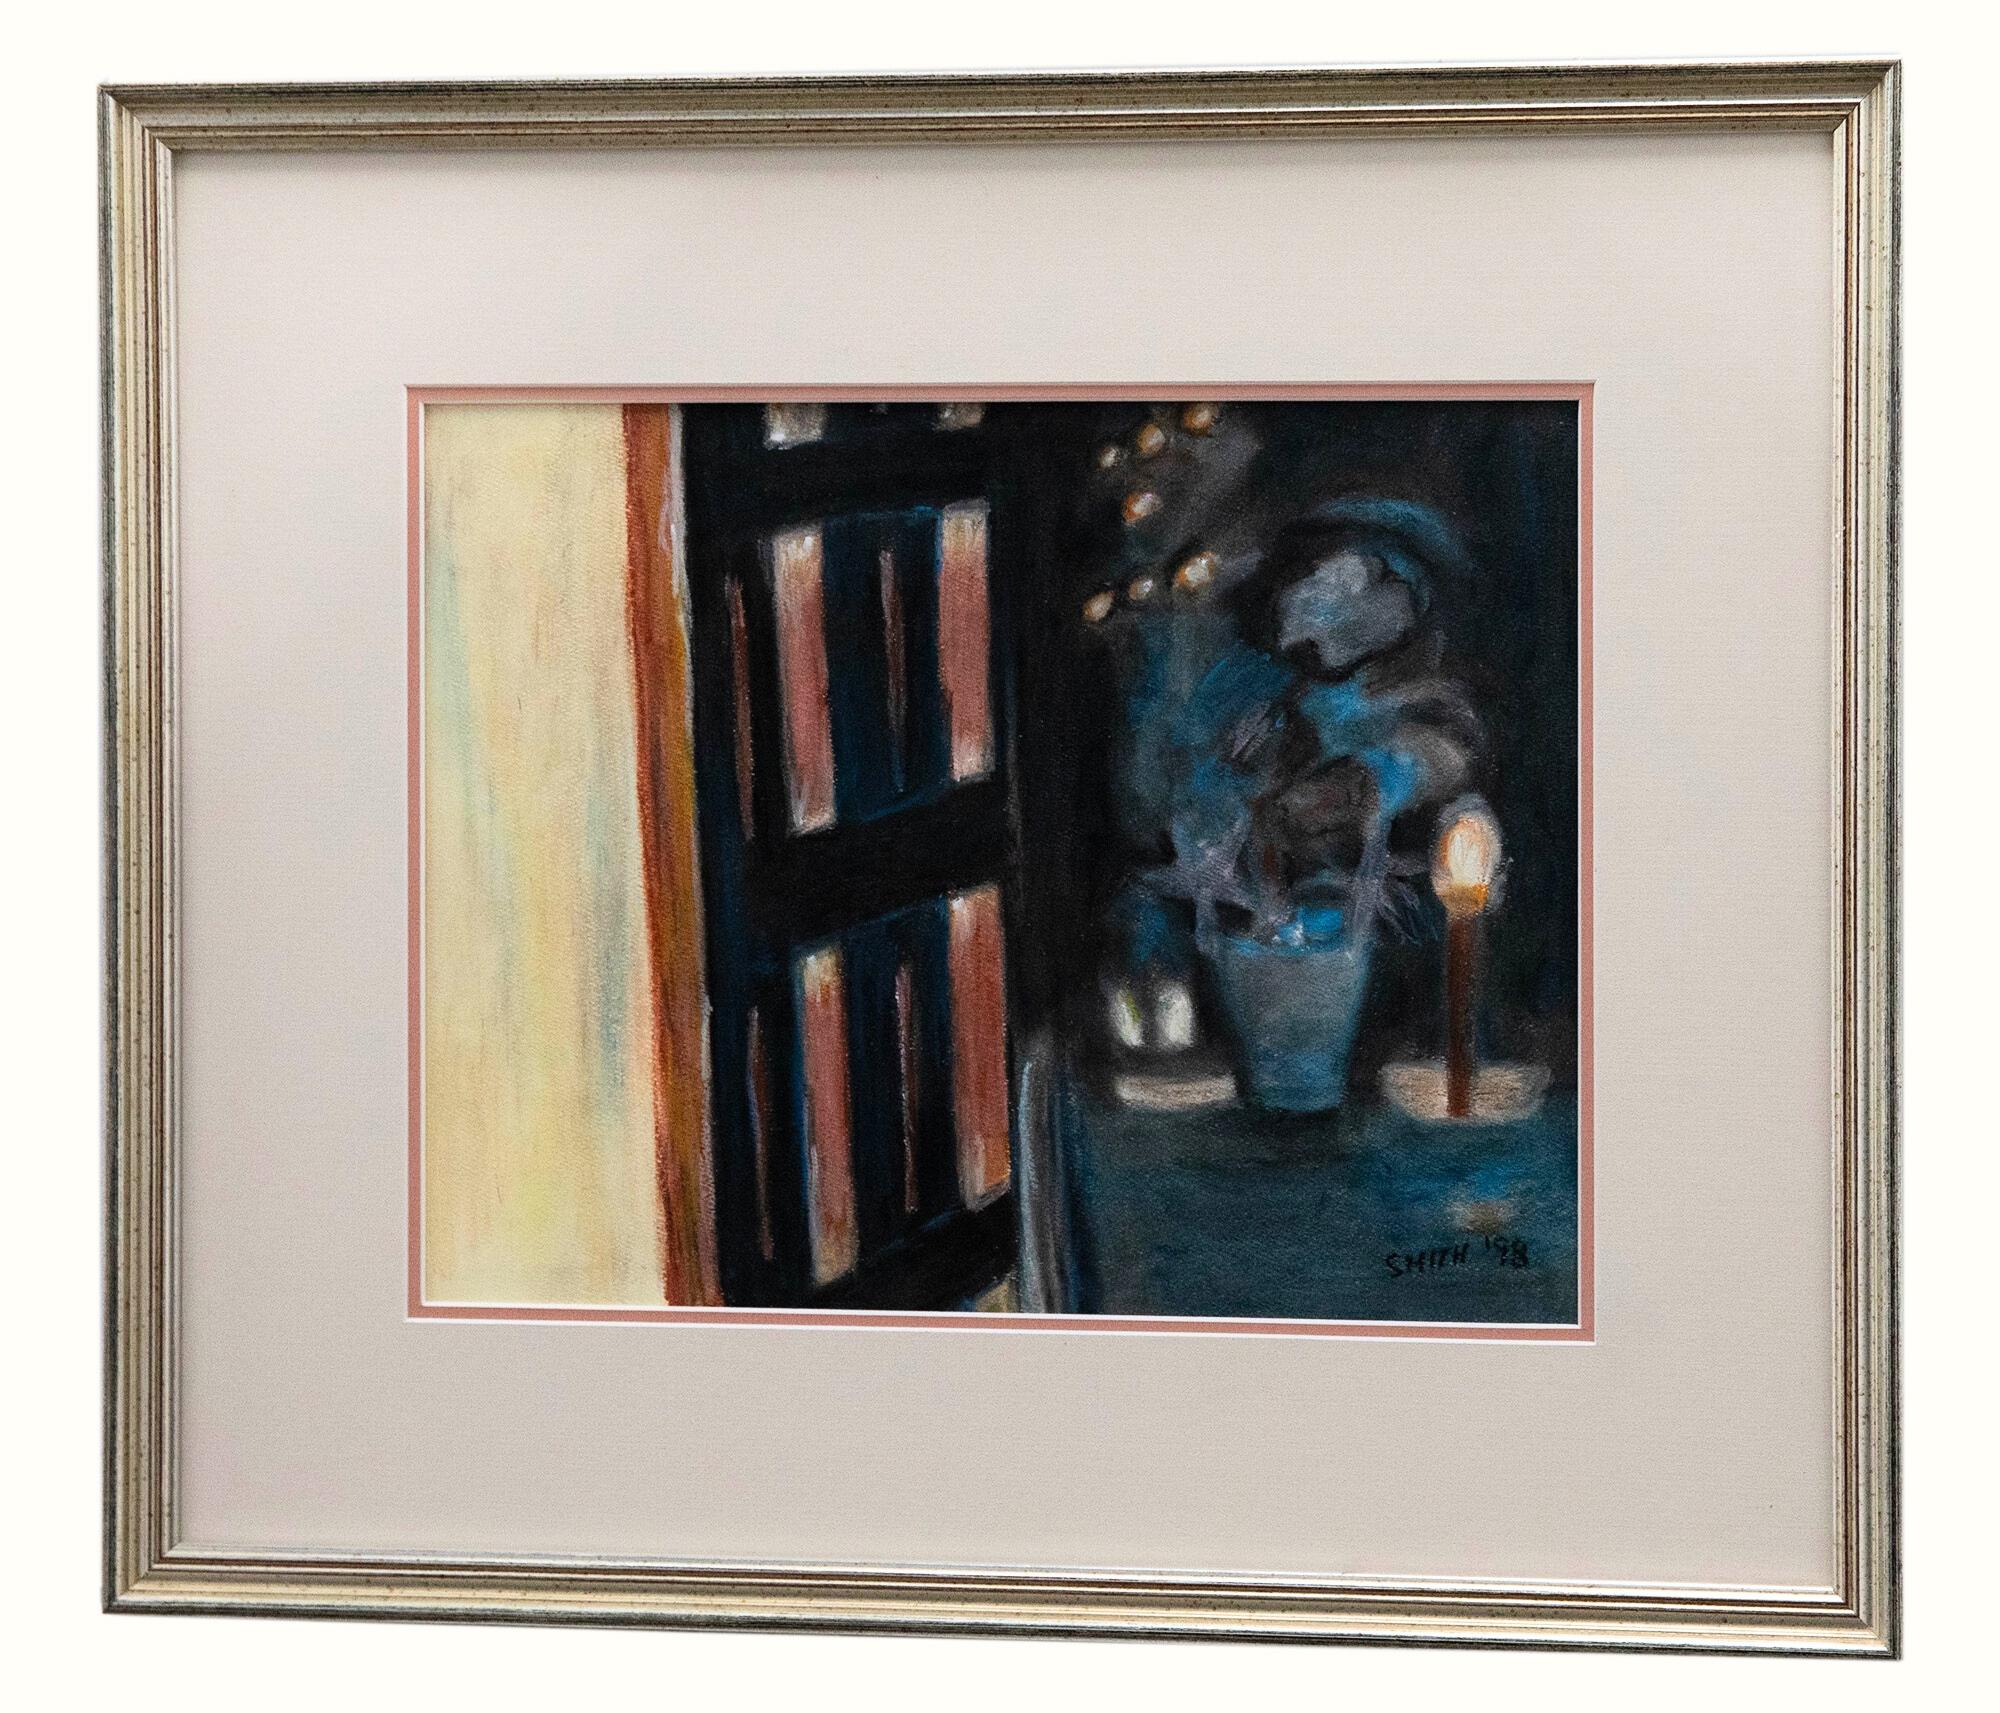 A colourful abstract study of a softly lit interior with a torch and a potted plant. Signed and dated to the lower right. Presented in a silver gilt frame and double card mount. Exhibition label verso with artist name, date and title. On paper. 